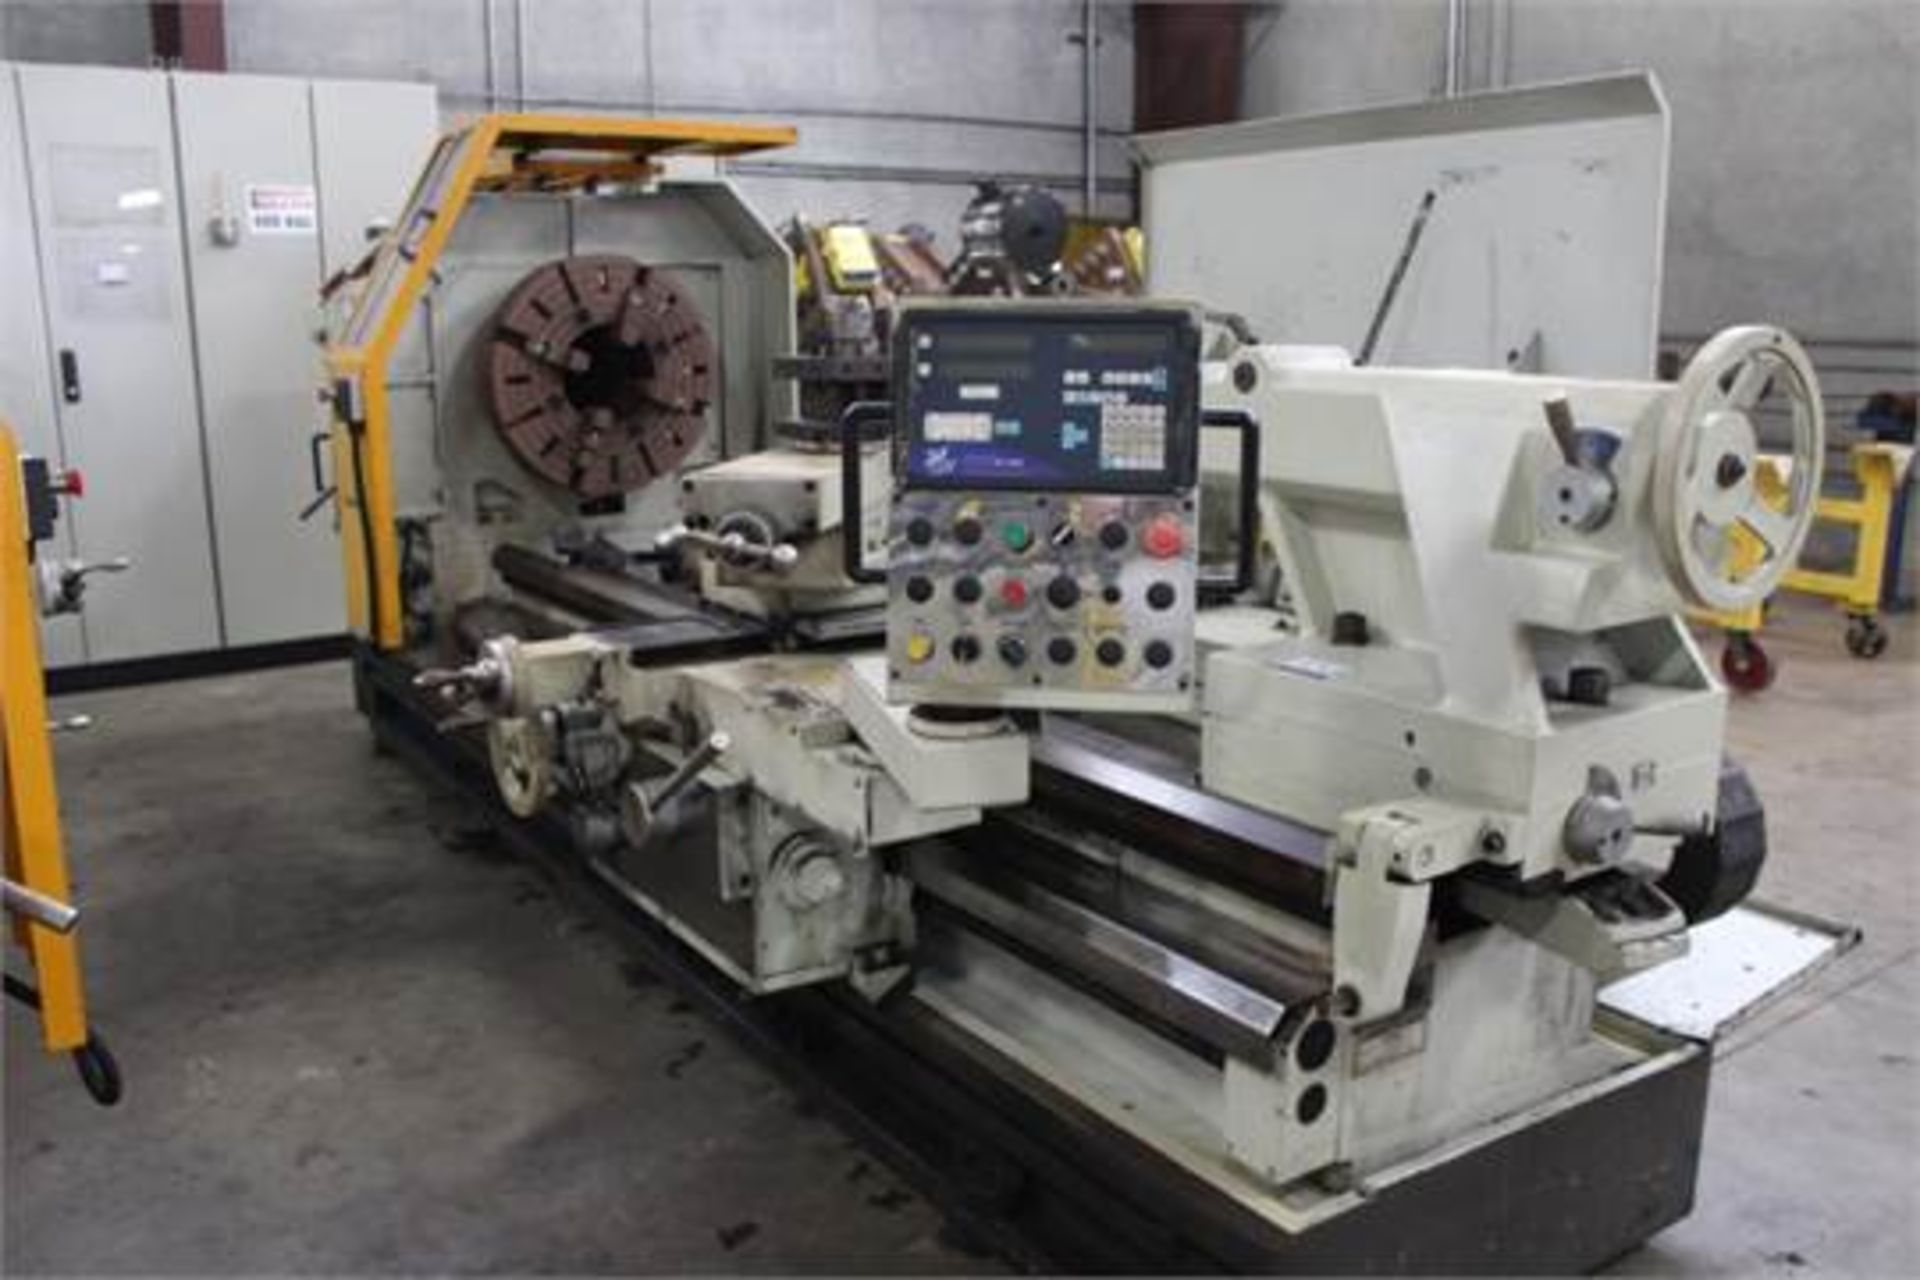 35” x 100” Eisen PA3510020 Hollow Spindle Engine Lathe, 10” spindle bore, 4 jaw chuck, DRO - Image 2 of 5